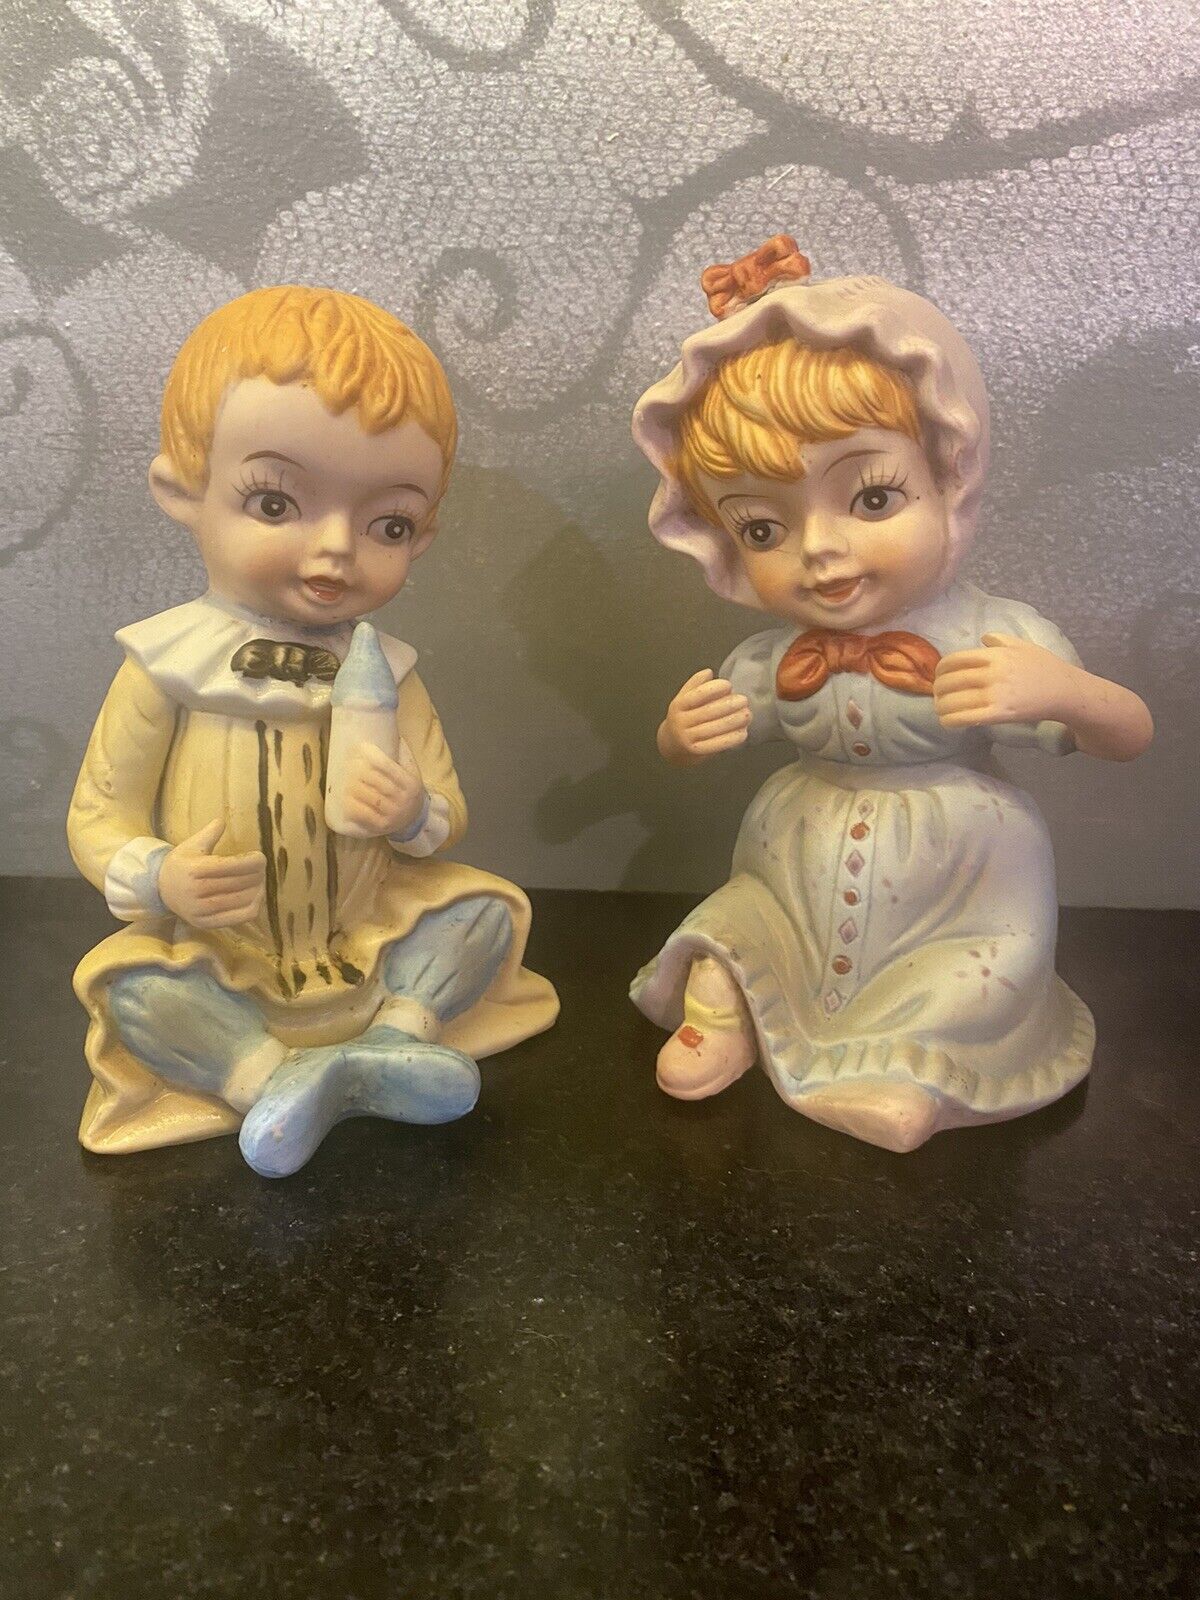 Set of 2 Vintage Bisque Porcelain Twin Piano Baby Figurines By Price Products